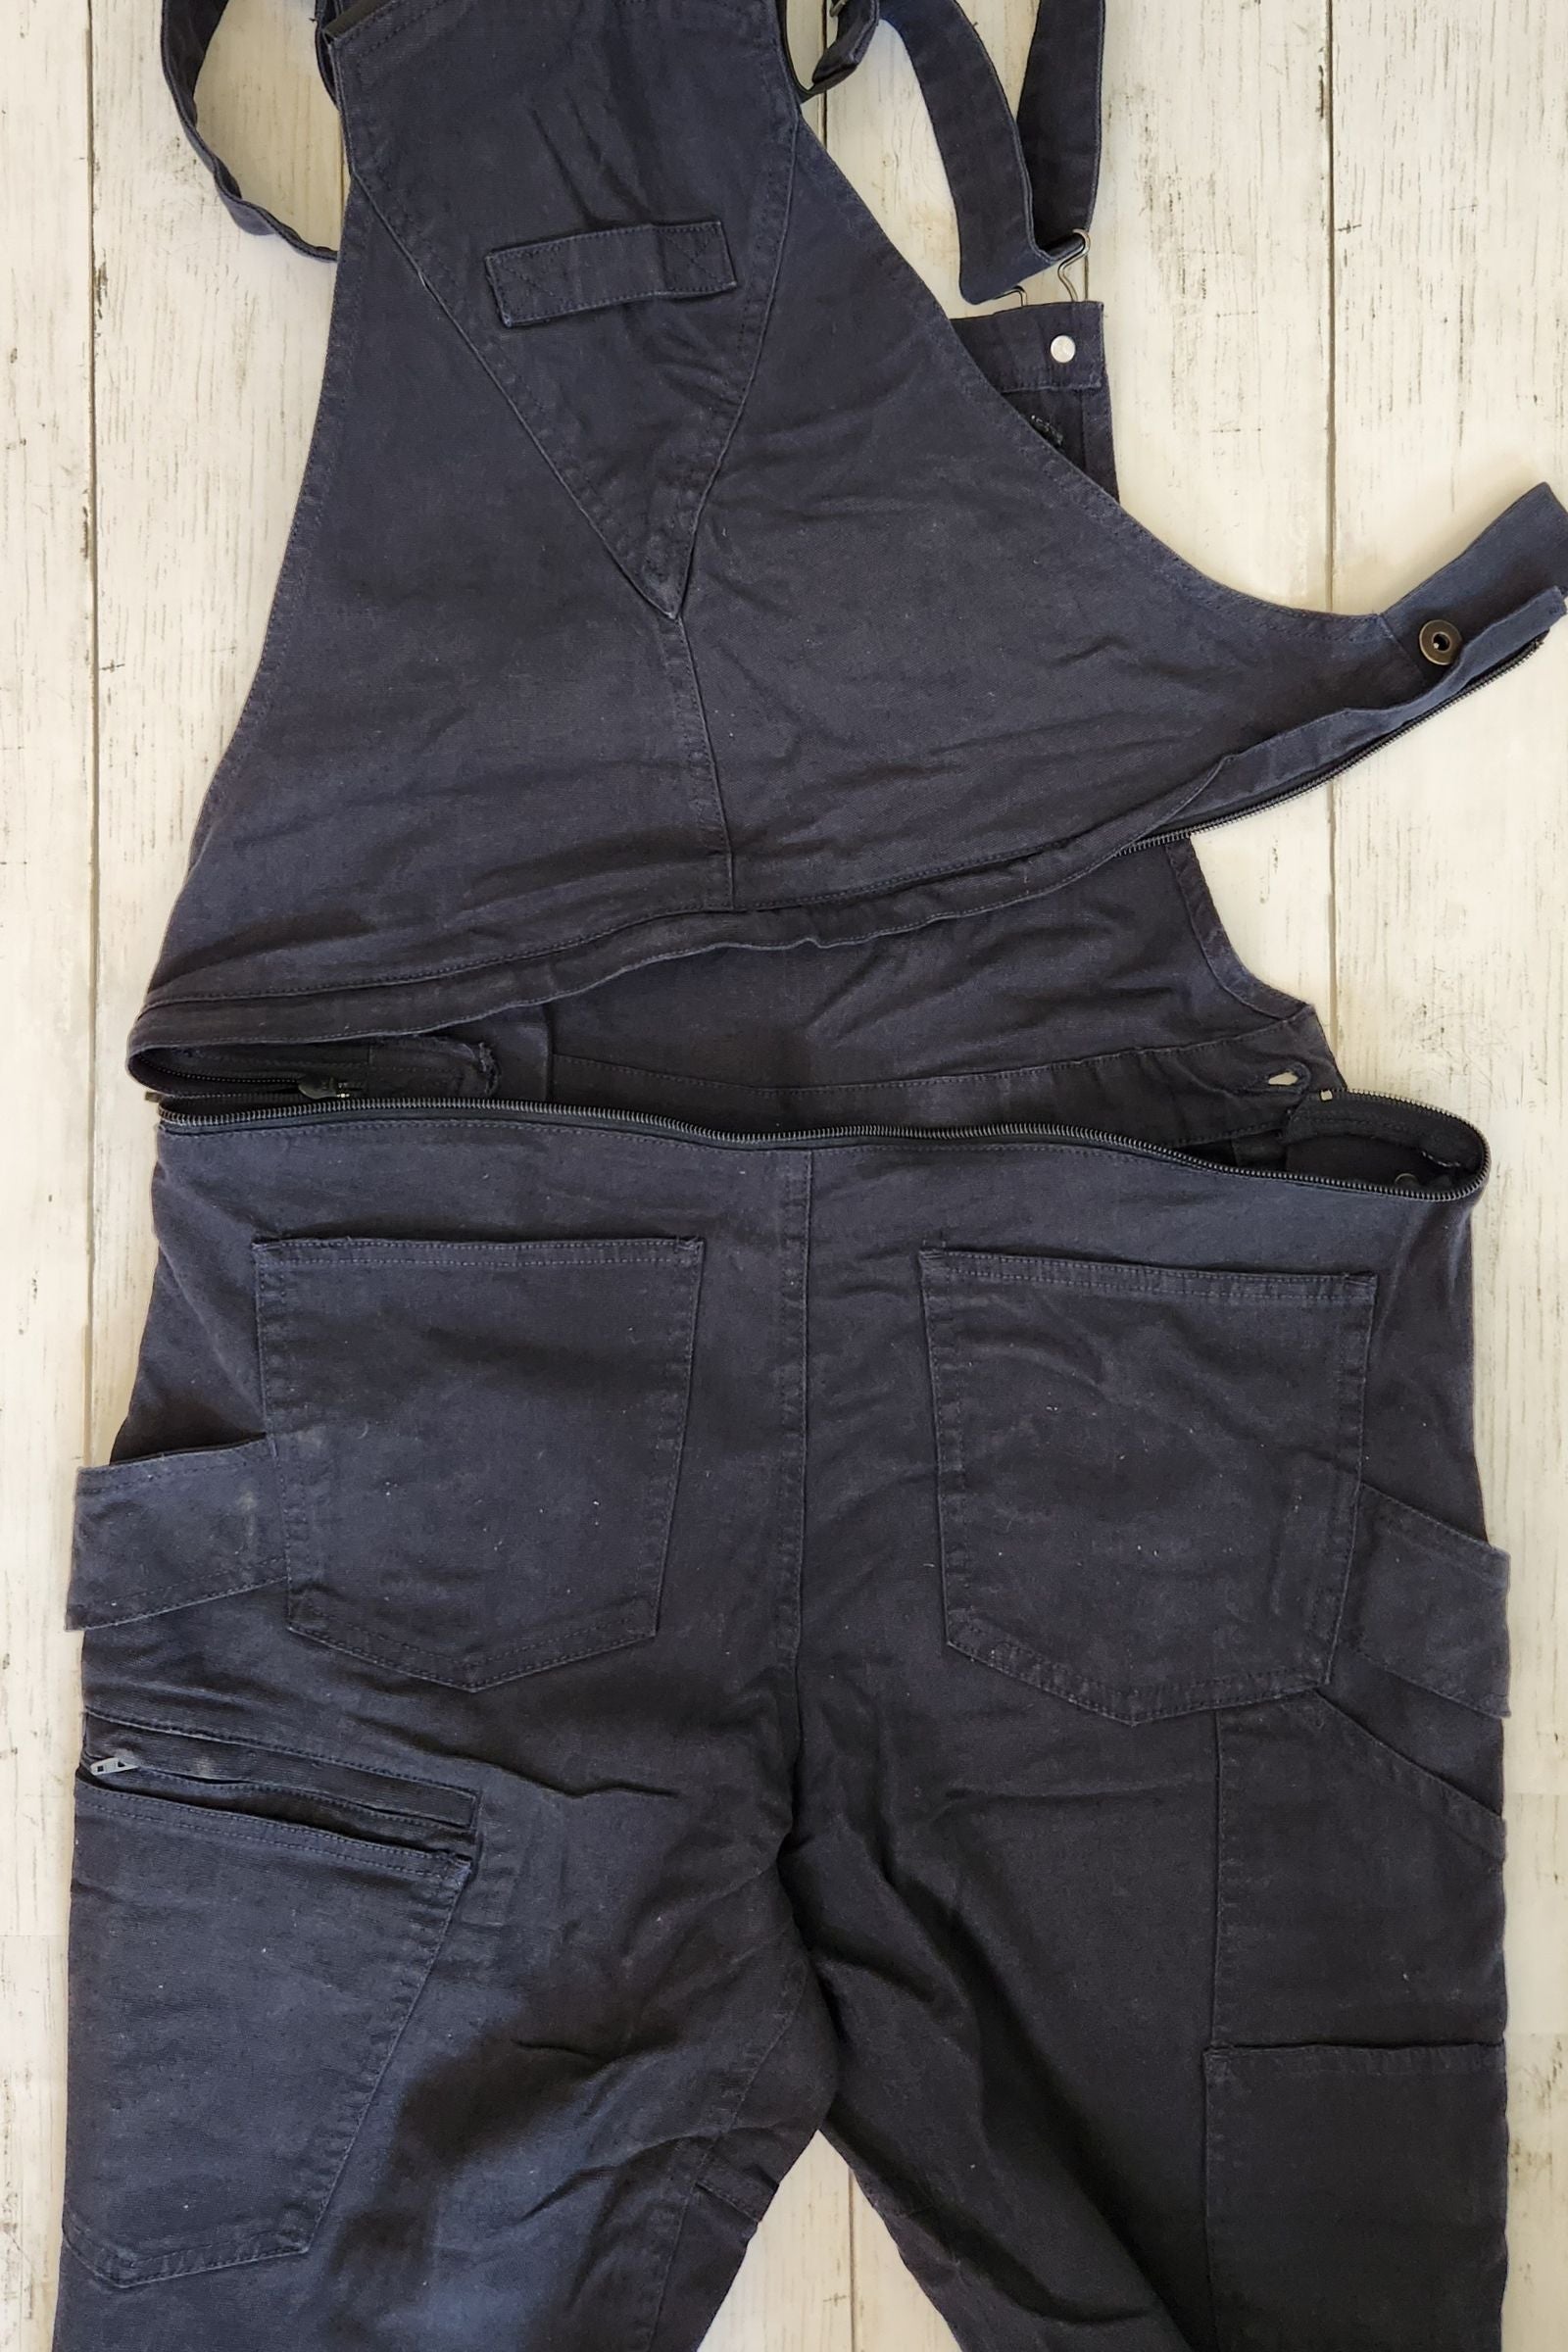 Dovetail Freshley Dropseat Overalls Navy